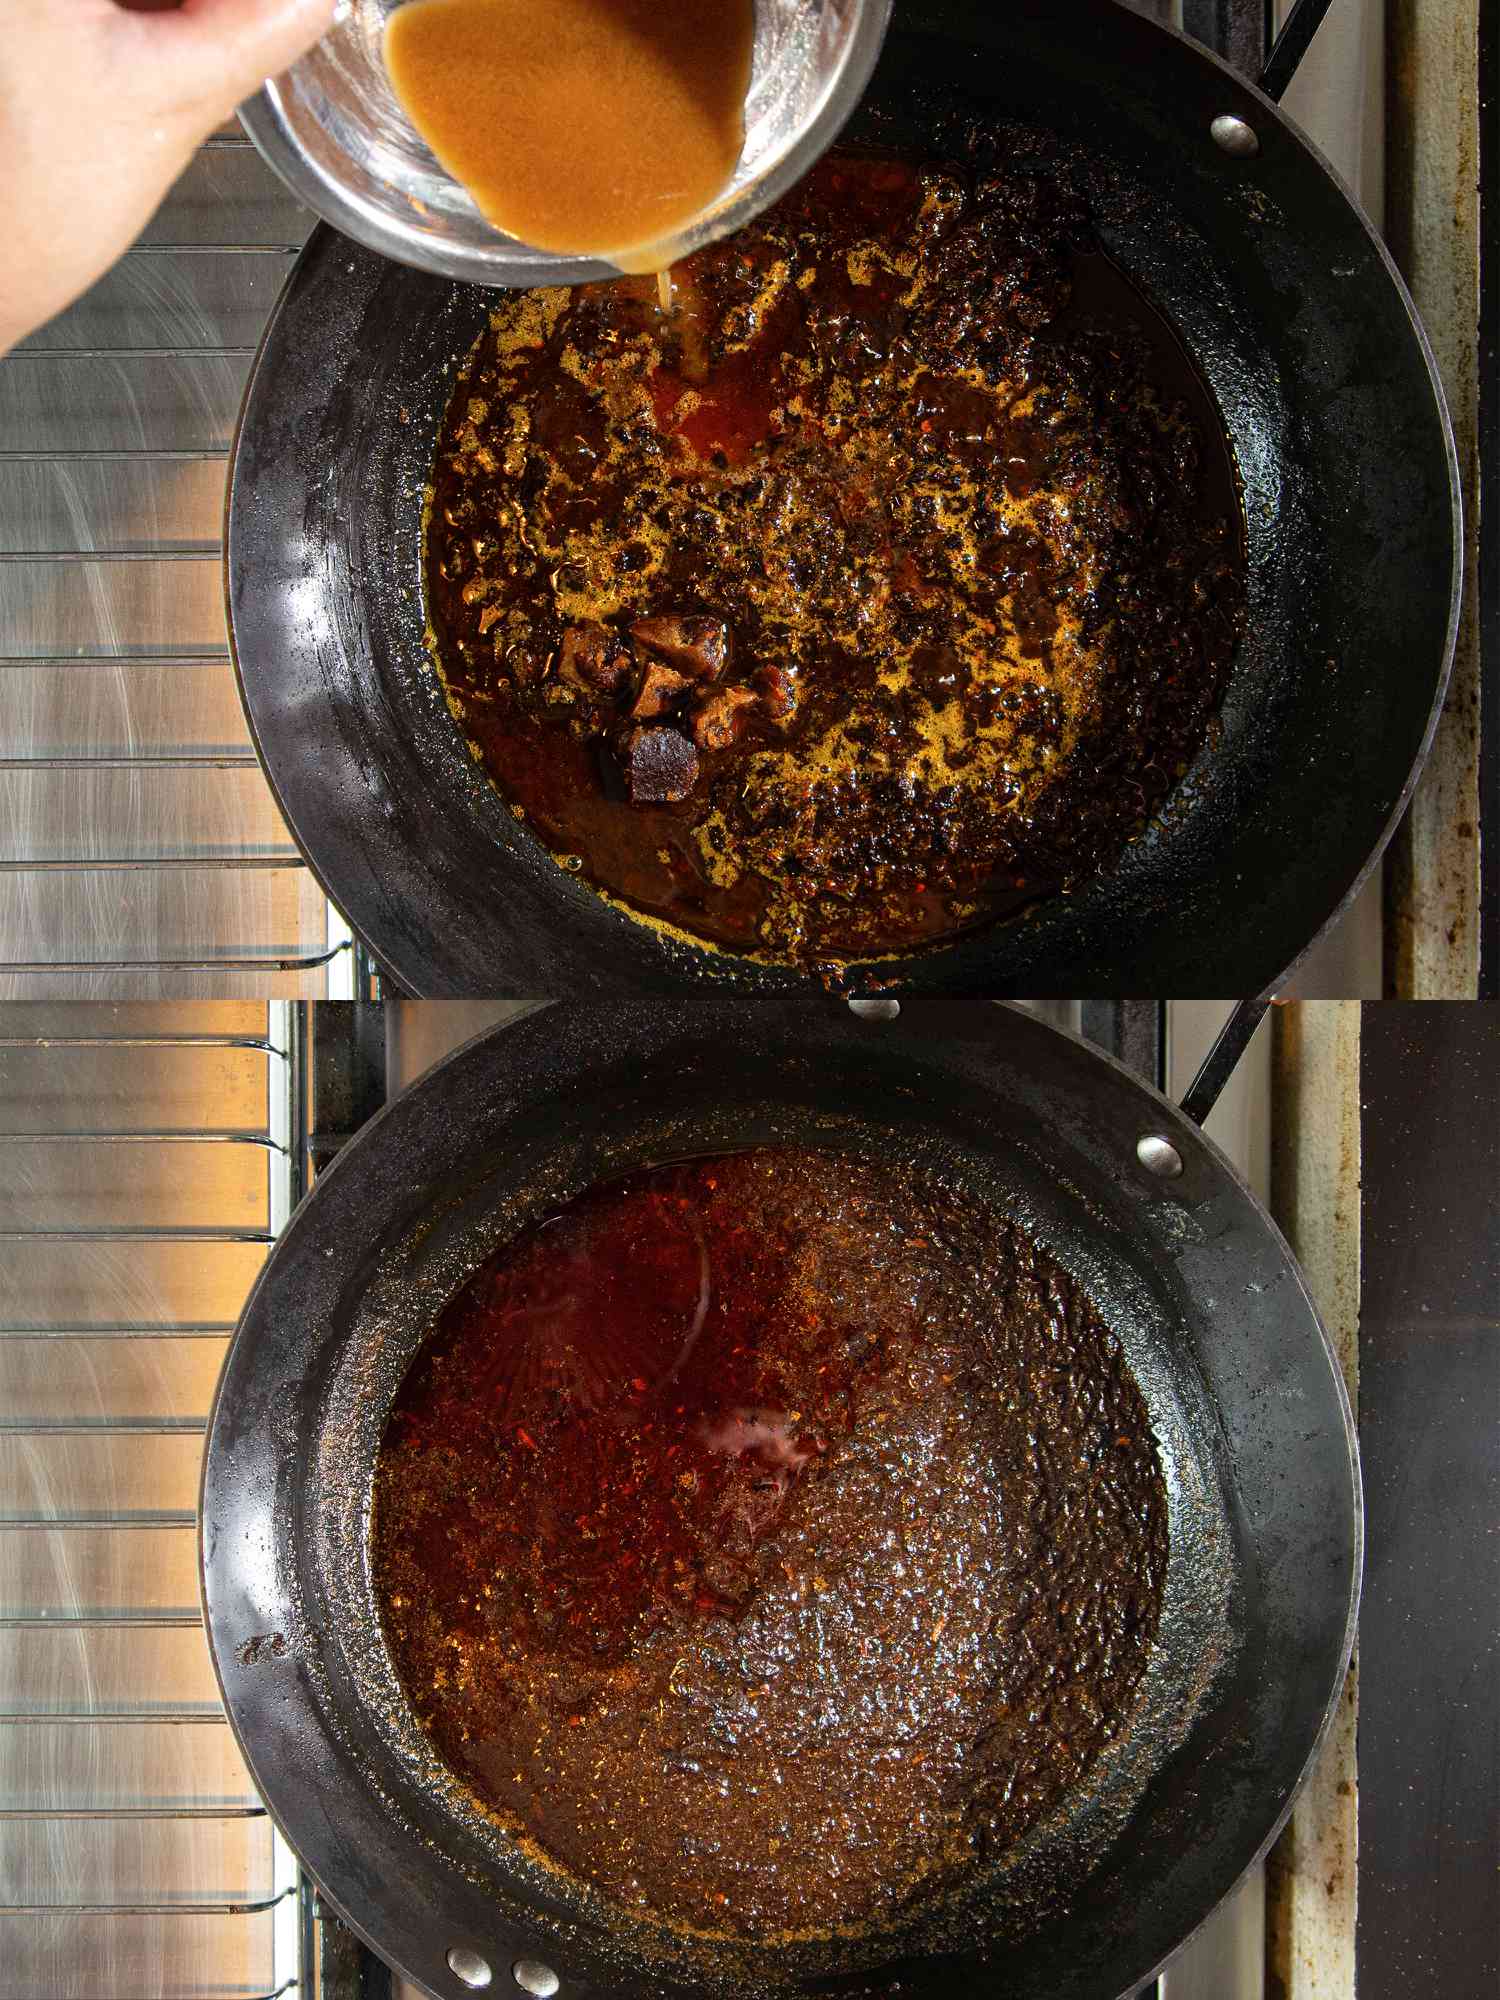 Two image collage of adding remaining ingredients to the wok and after oil has seperated